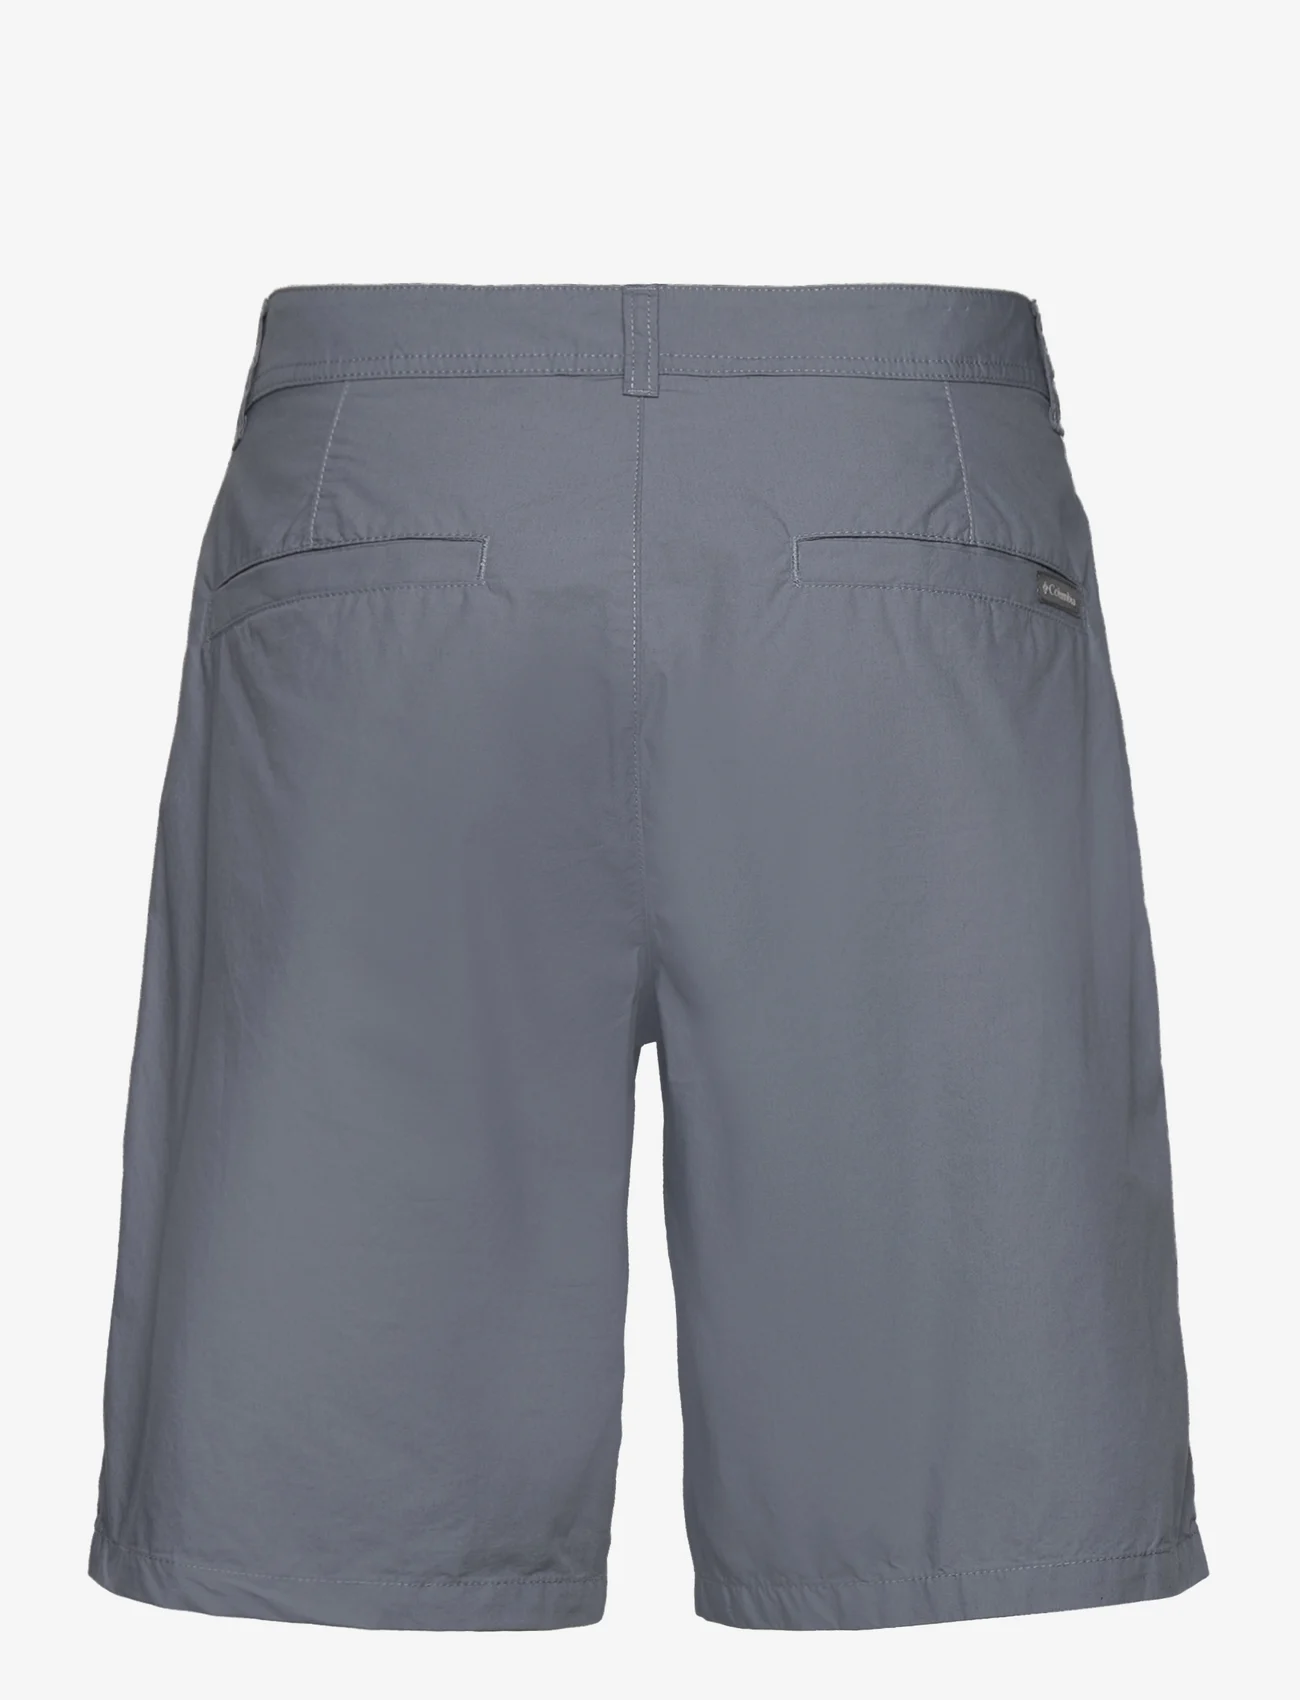 Columbia Sportswear - Washed Out Short - outdoor shorts - grey ash - 1